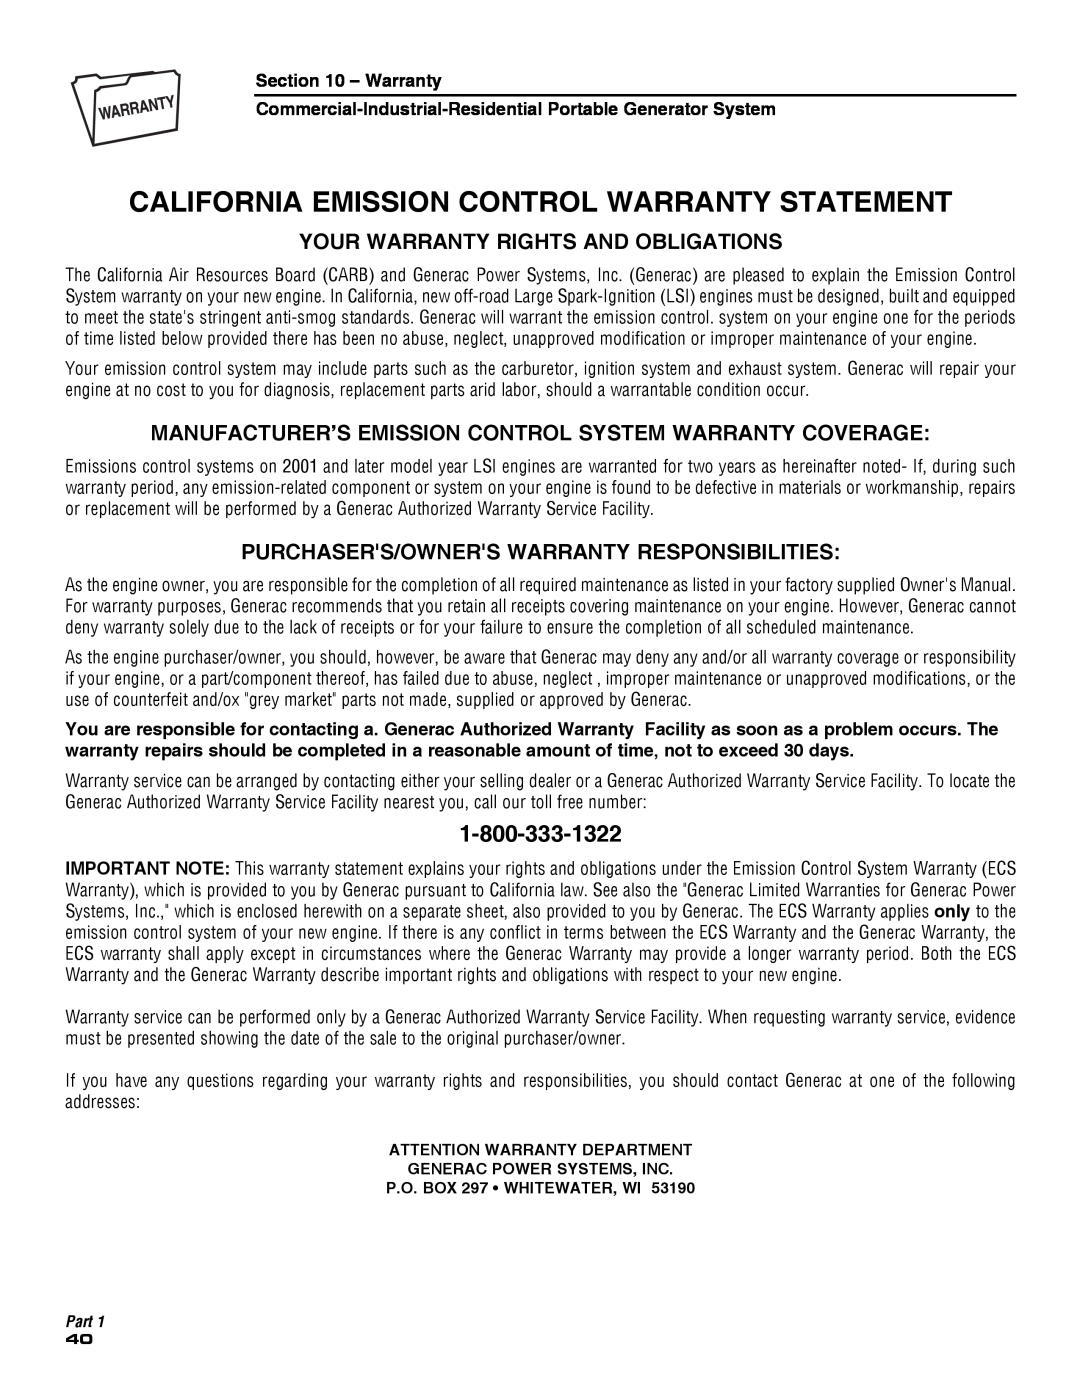 Guardian Technologies 5209 California Emission Control Warranty Statement, Your Warranty Rights And Obligations 